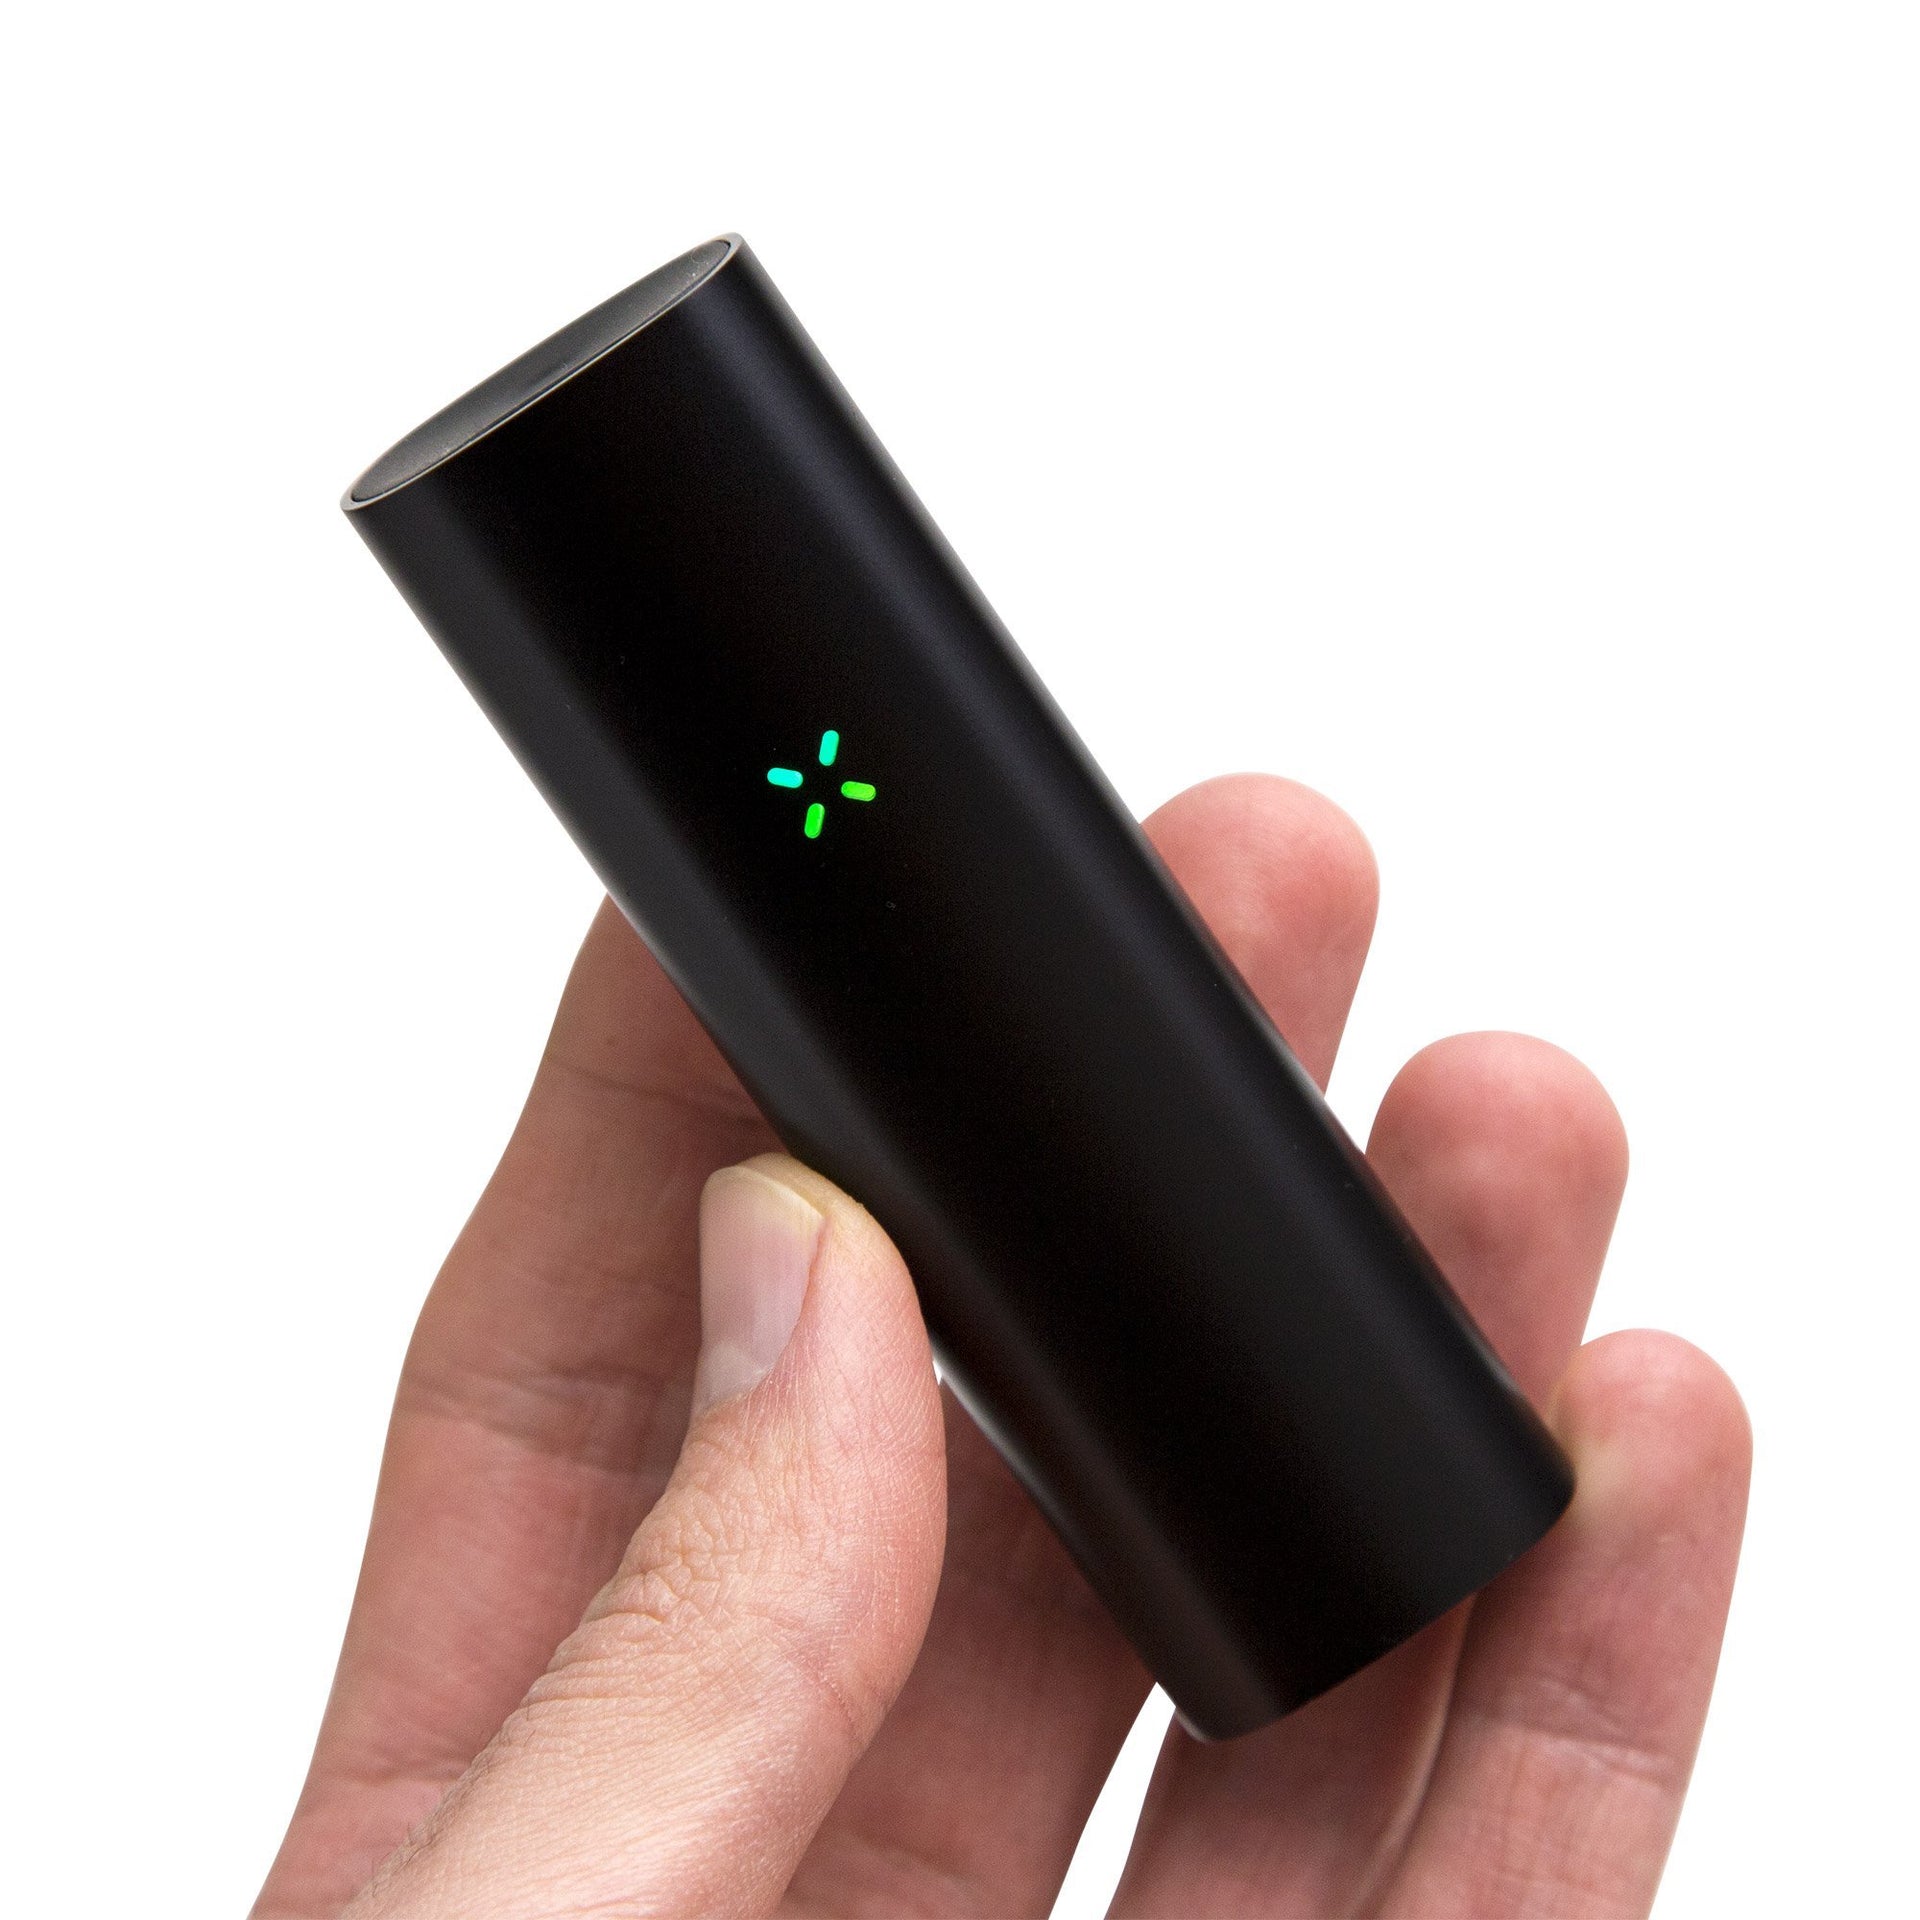 Pax 3 Complete Kit  Multi Use Concentrate & Dry Herb Vaporizer